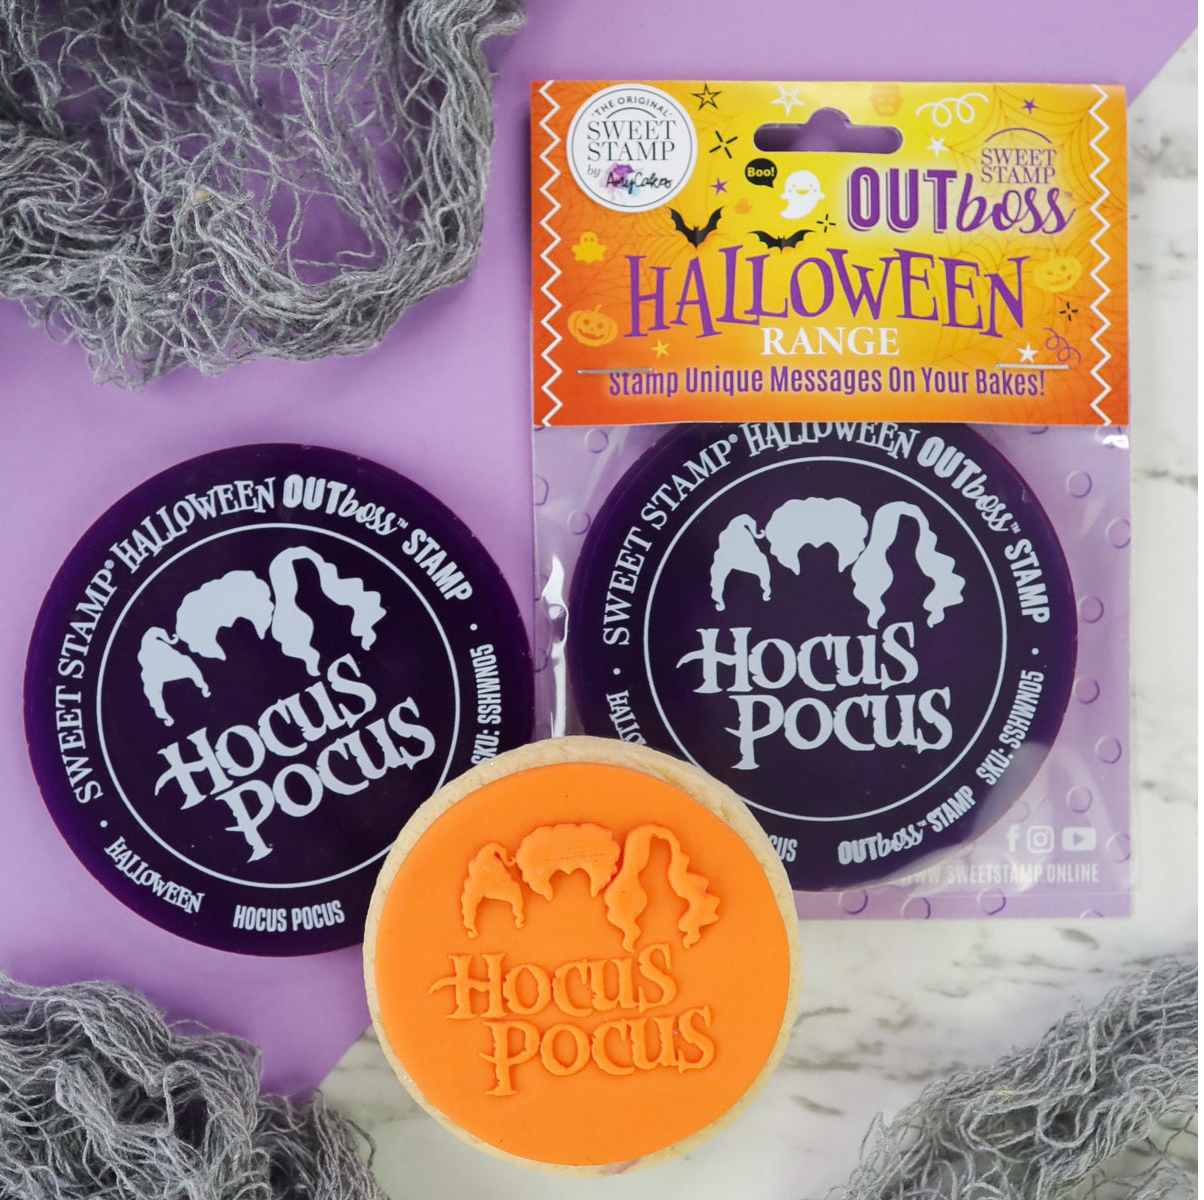 "HOCUS POCUS" OUTBOSS HALLOWEEN BY SWEET STAMP